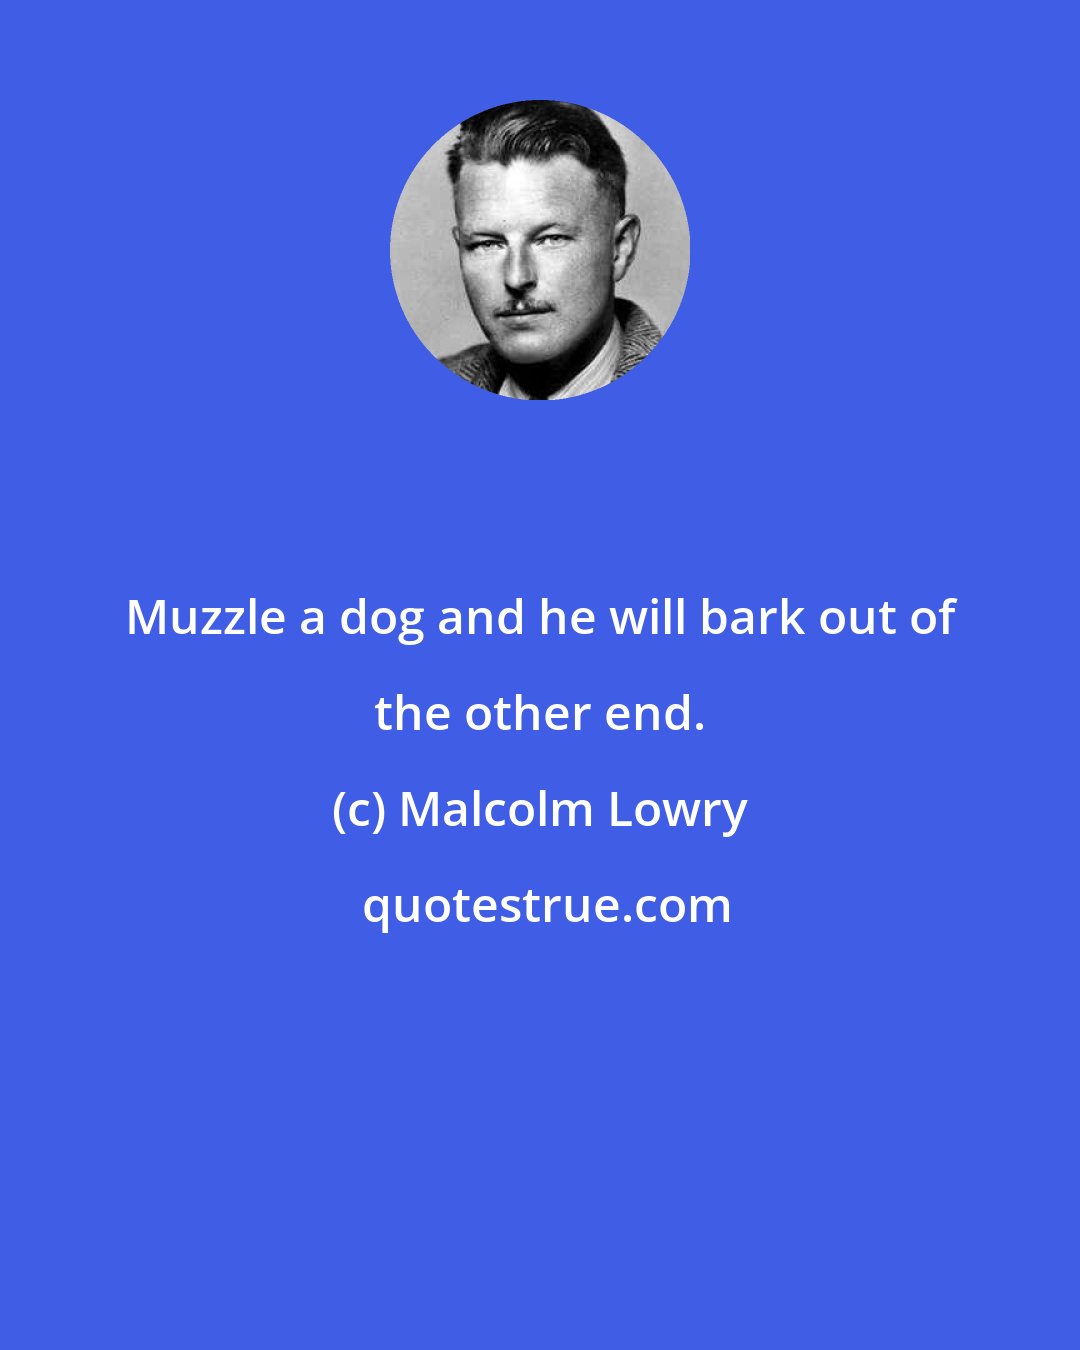 Malcolm Lowry: Muzzle a dog and he will bark out of the other end.